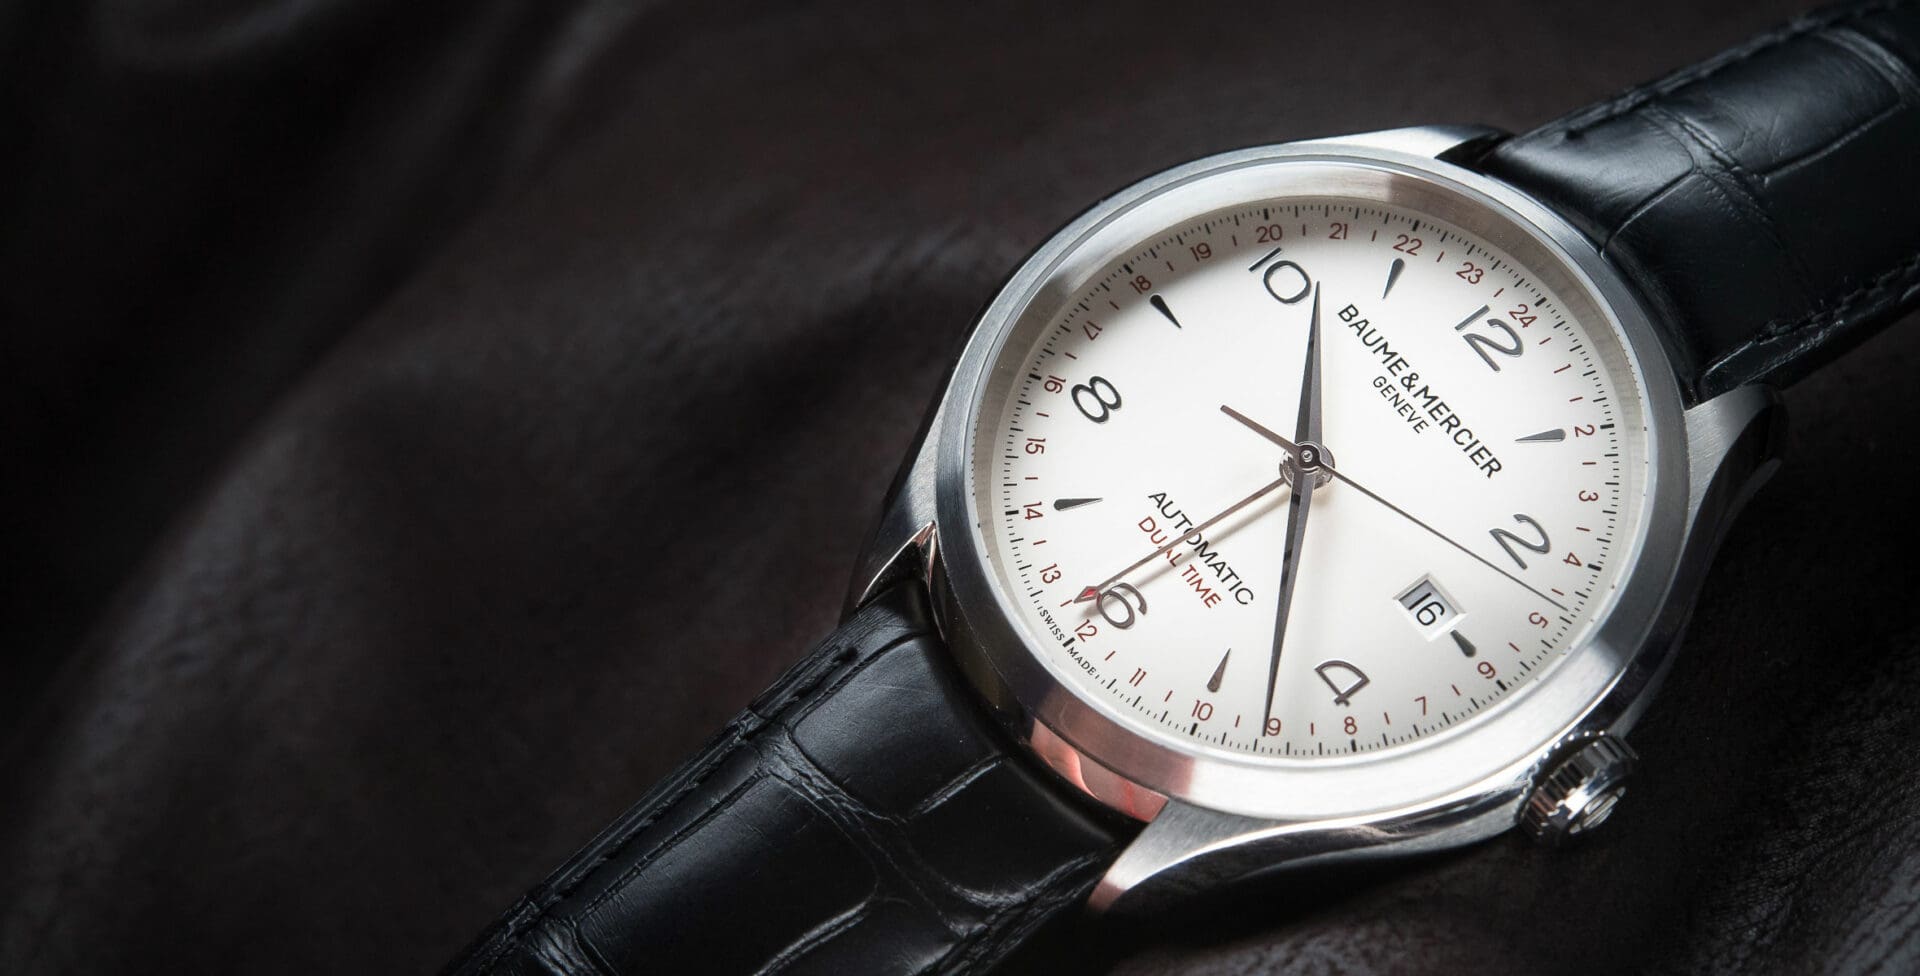 IN-DEPTH: The Baume & Mercier Clifton GMT Review ref 10112 (LIVE PICS & PRICING)